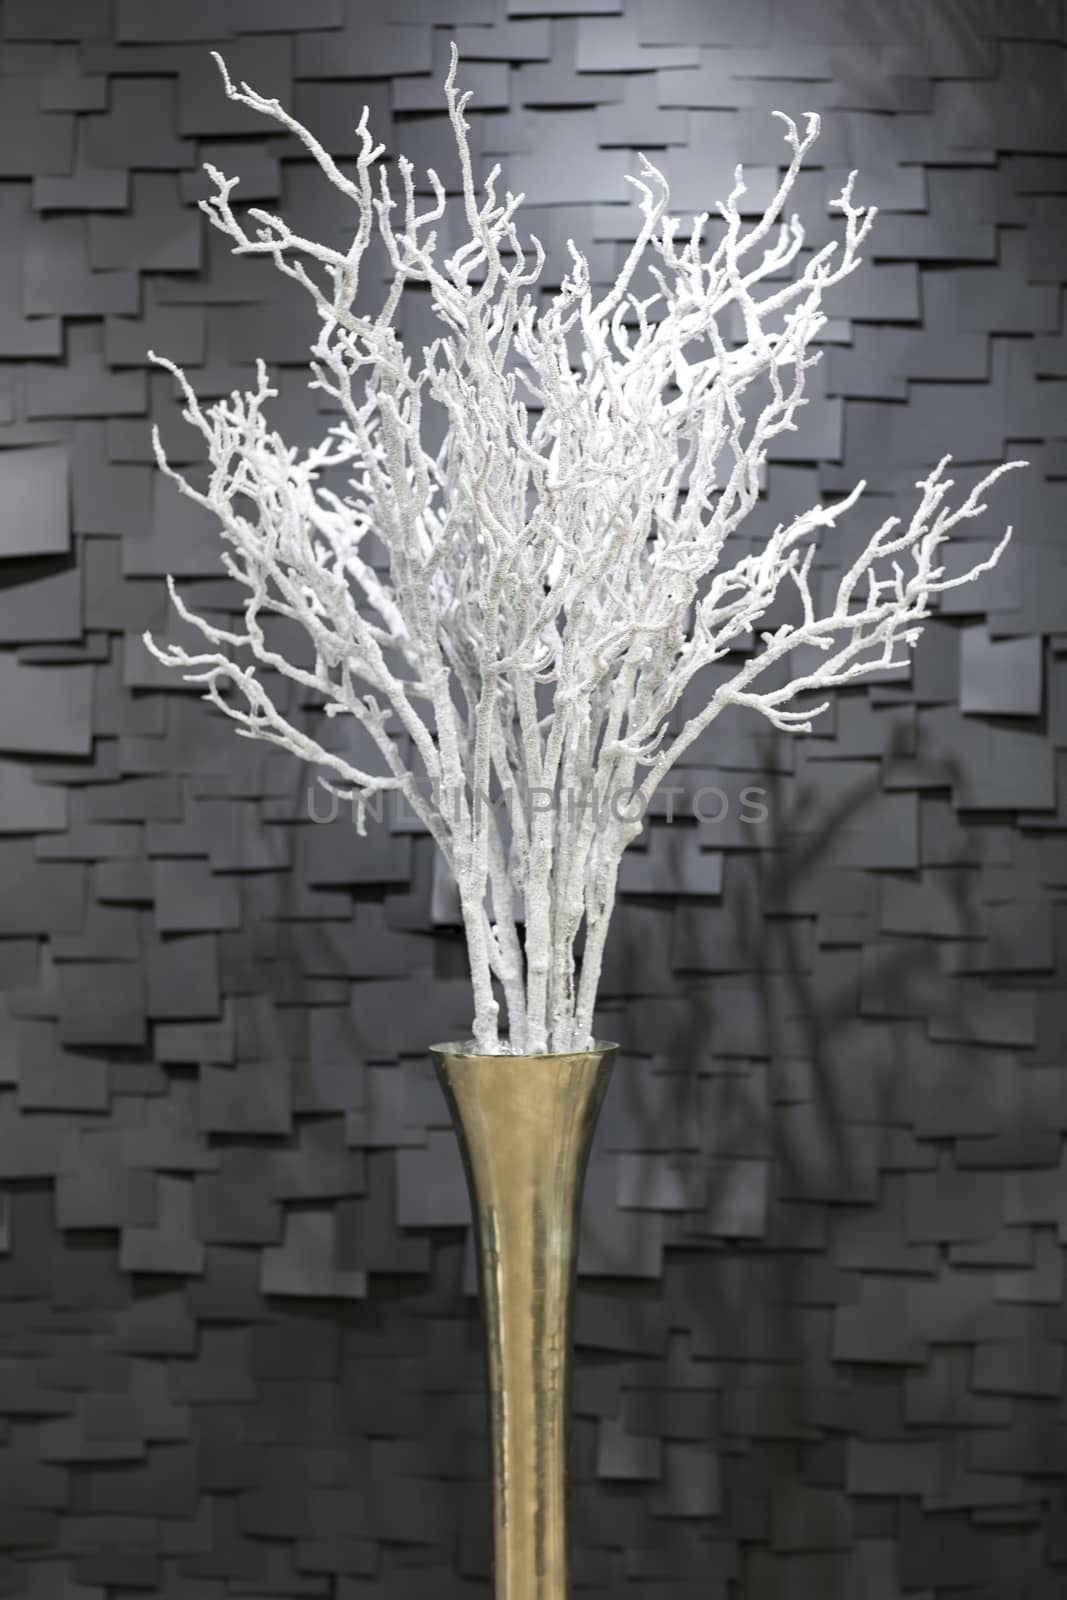 handmade artificial white a snowy branch in a pot on a dark background in the form of tiles